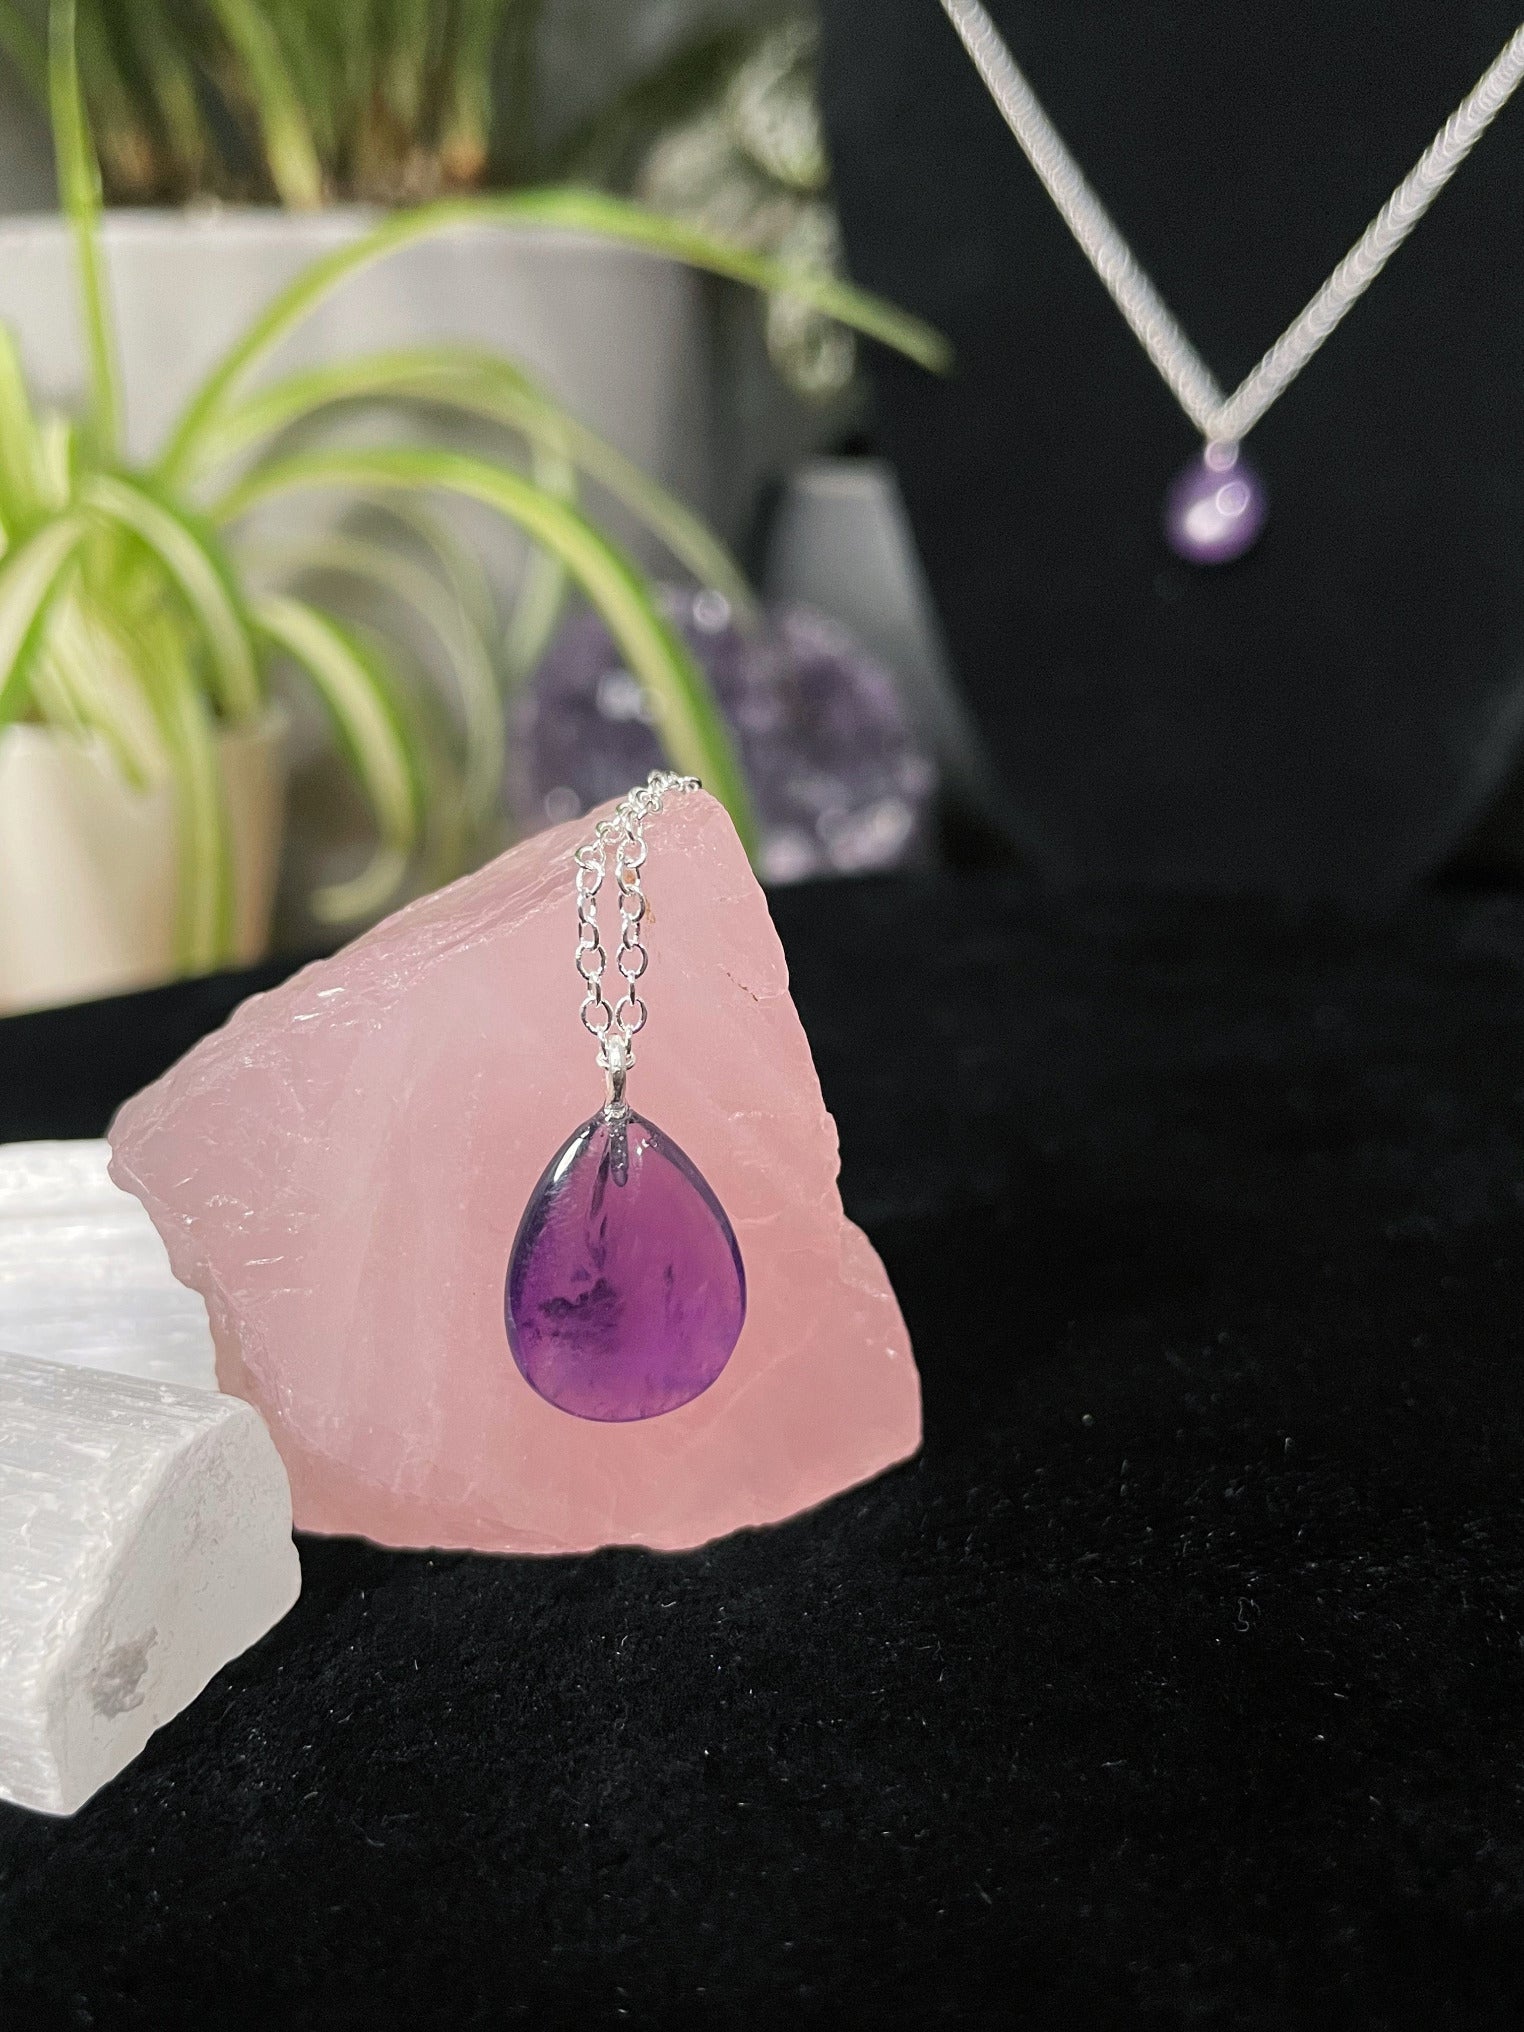 Pictured is a small amethyst teardrop necklace with a silver chain.